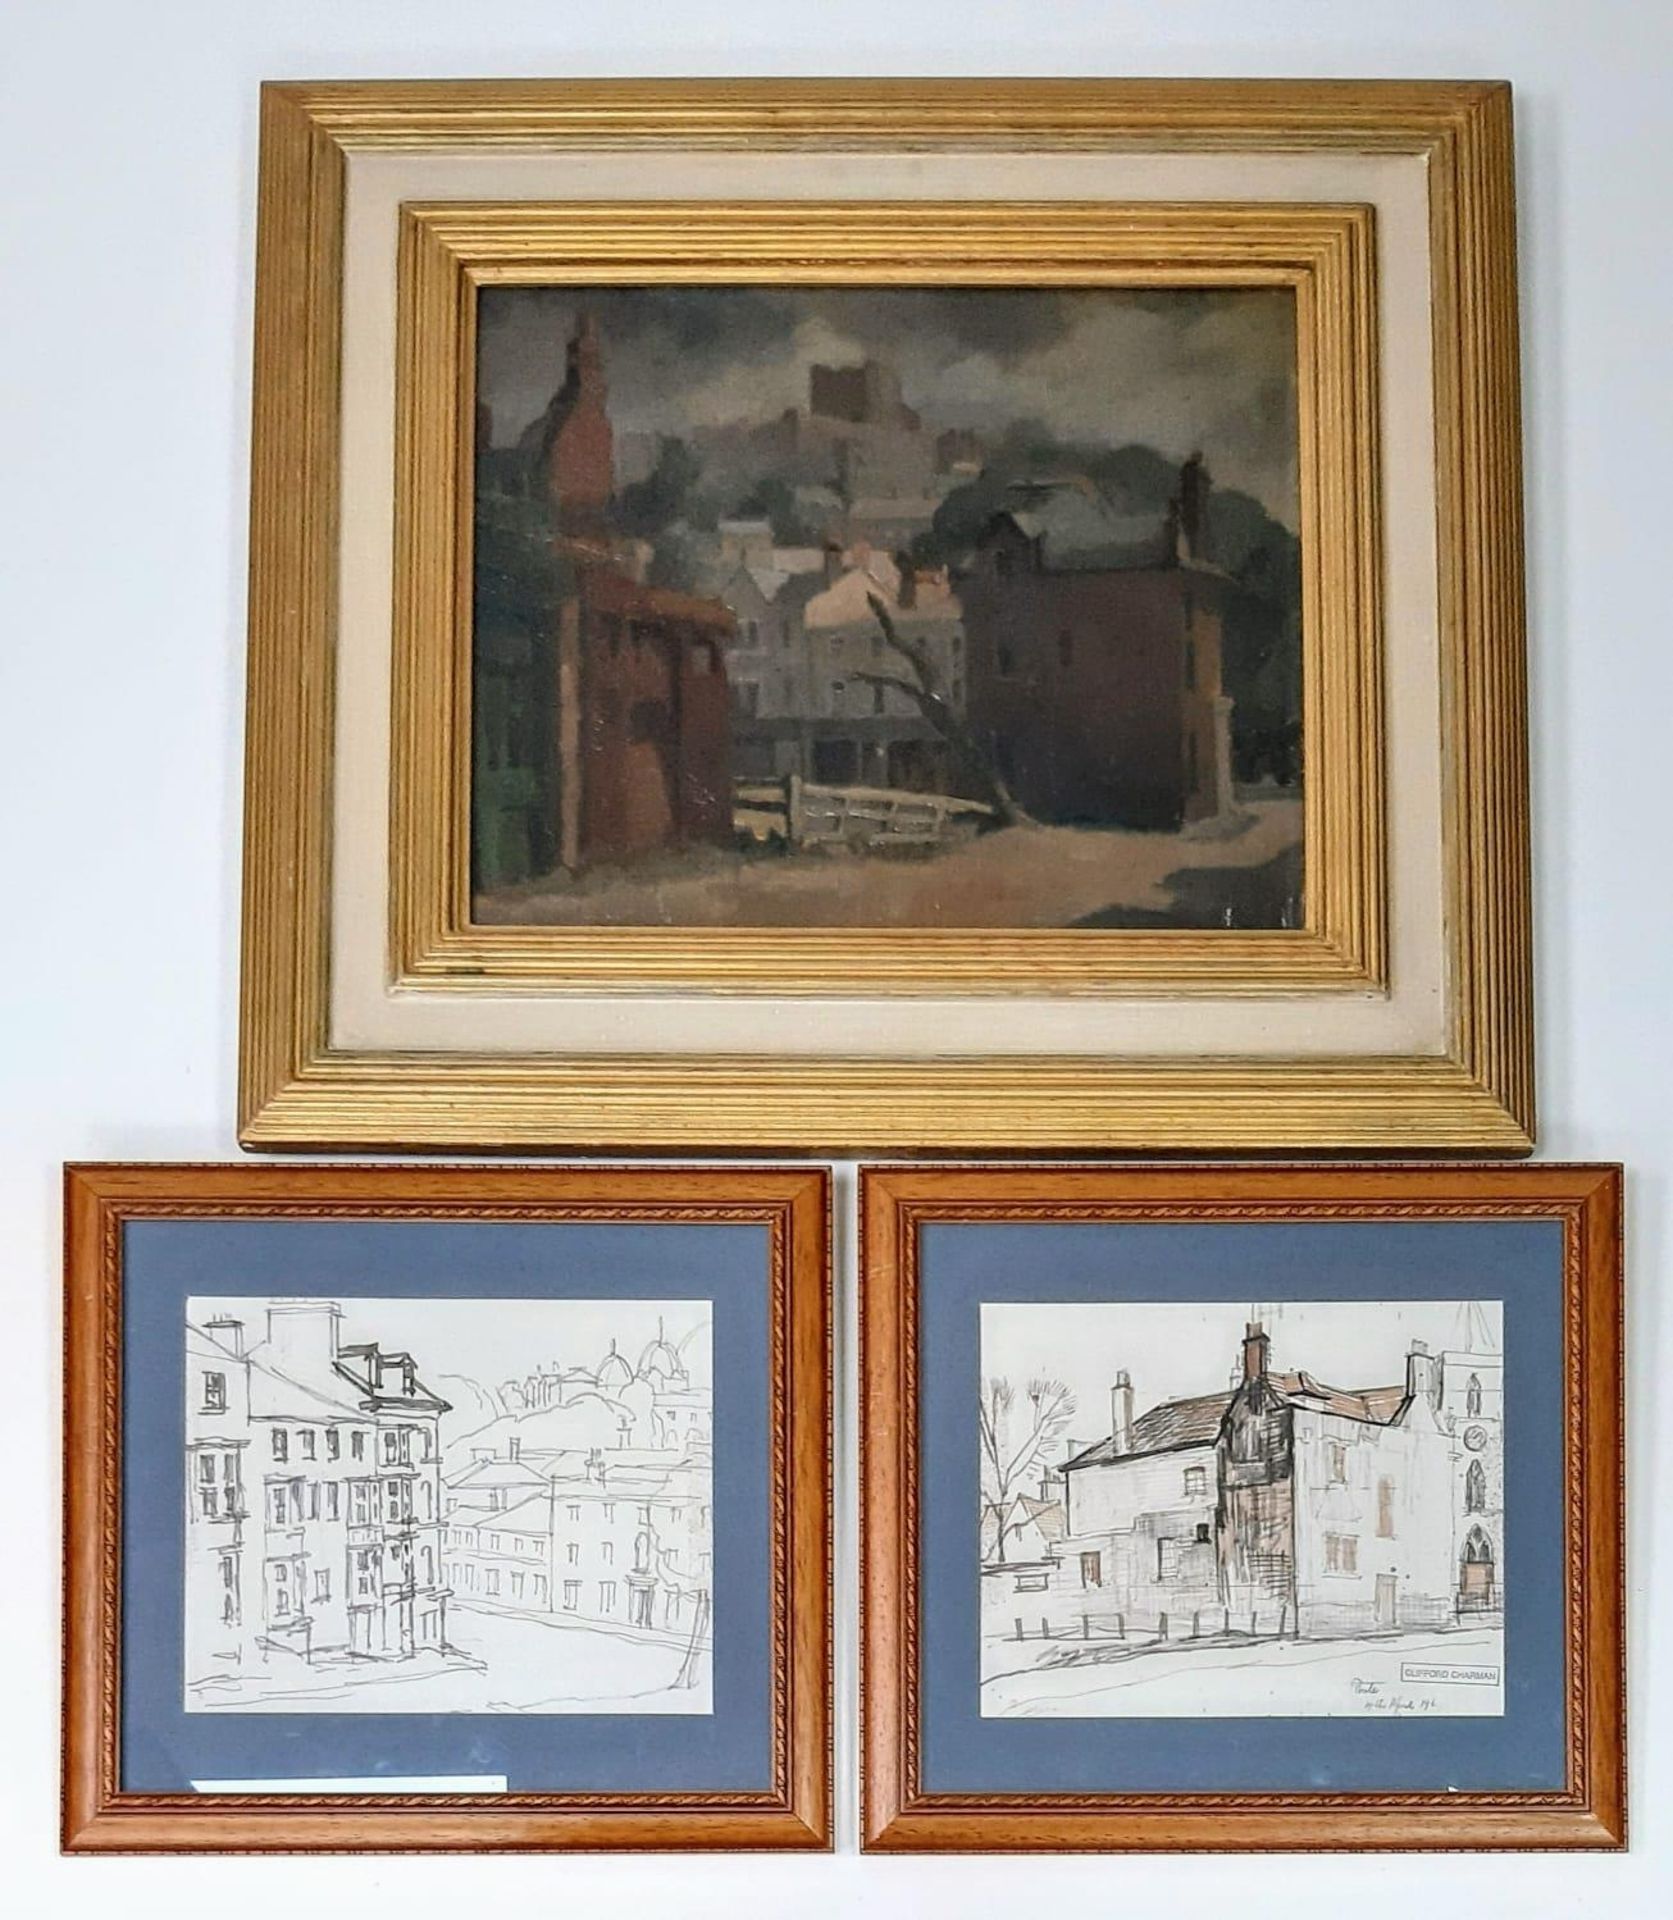 A unique collection of art by known British artist, Clifford Charman (1910-1992). Firstly, 'View